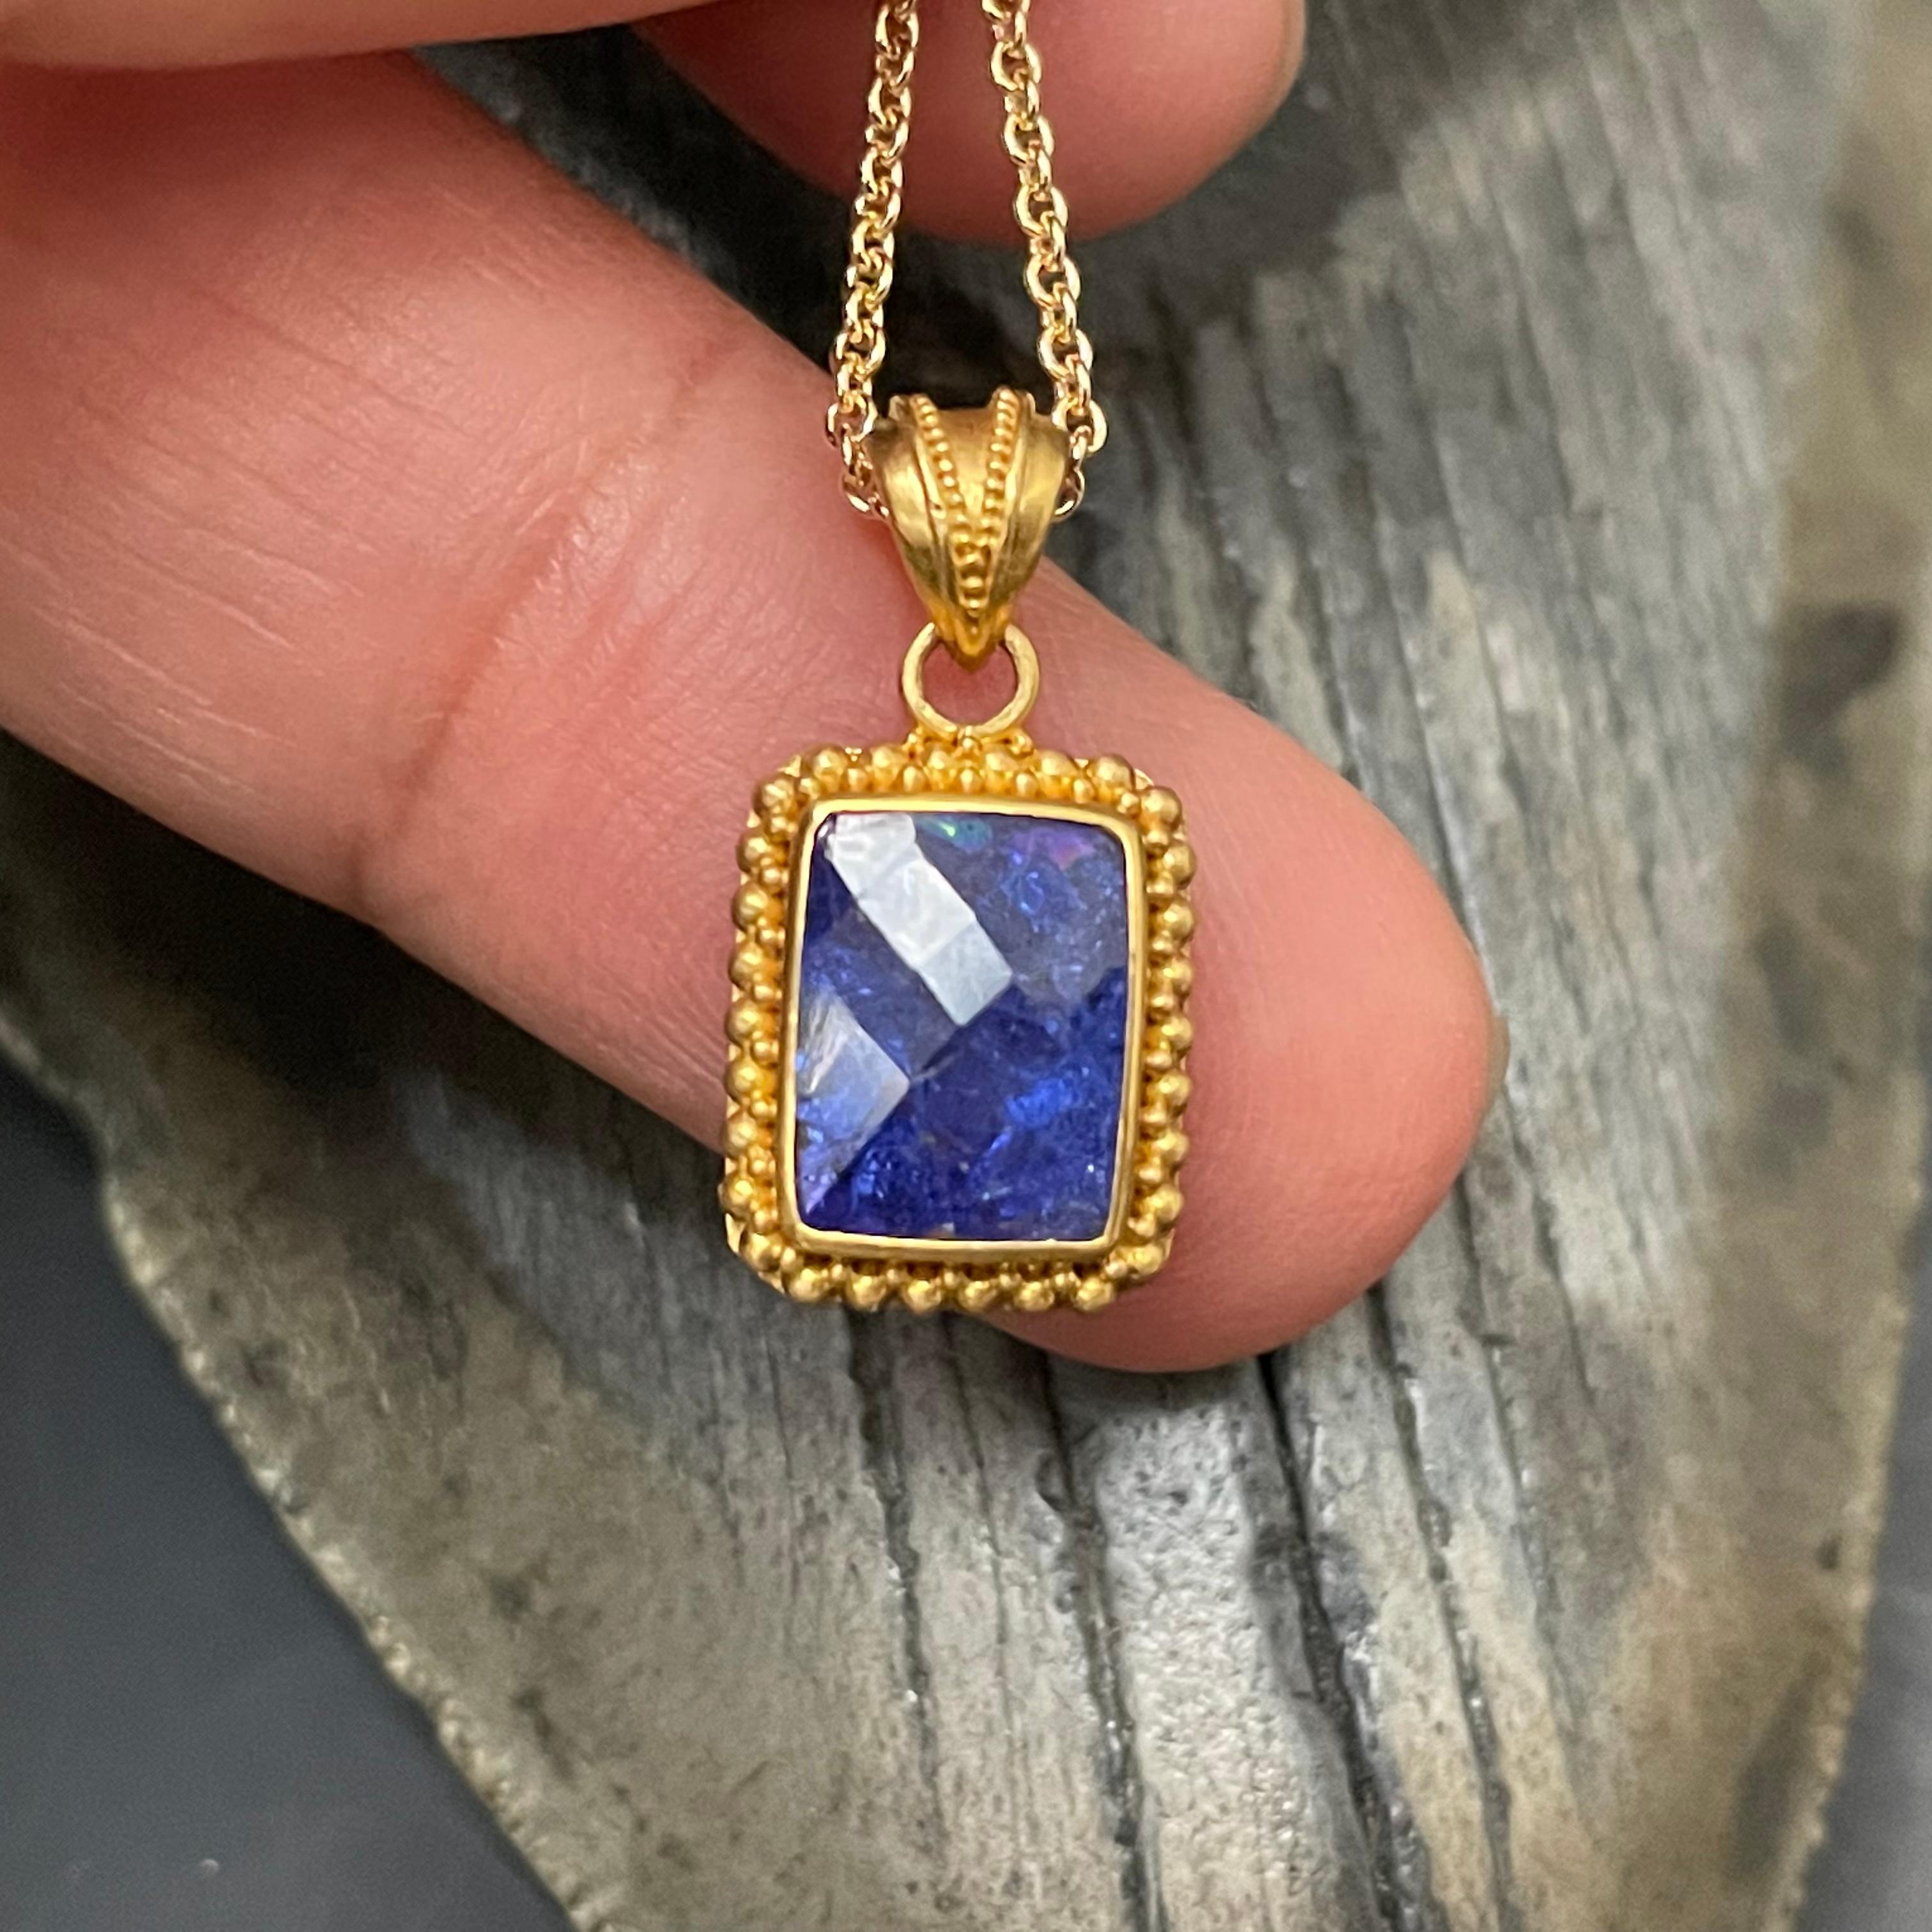 I lively deep blue/purple 7 x 9 mm rectangular rose cut tanzanite is highlighted within a 22K granulated 